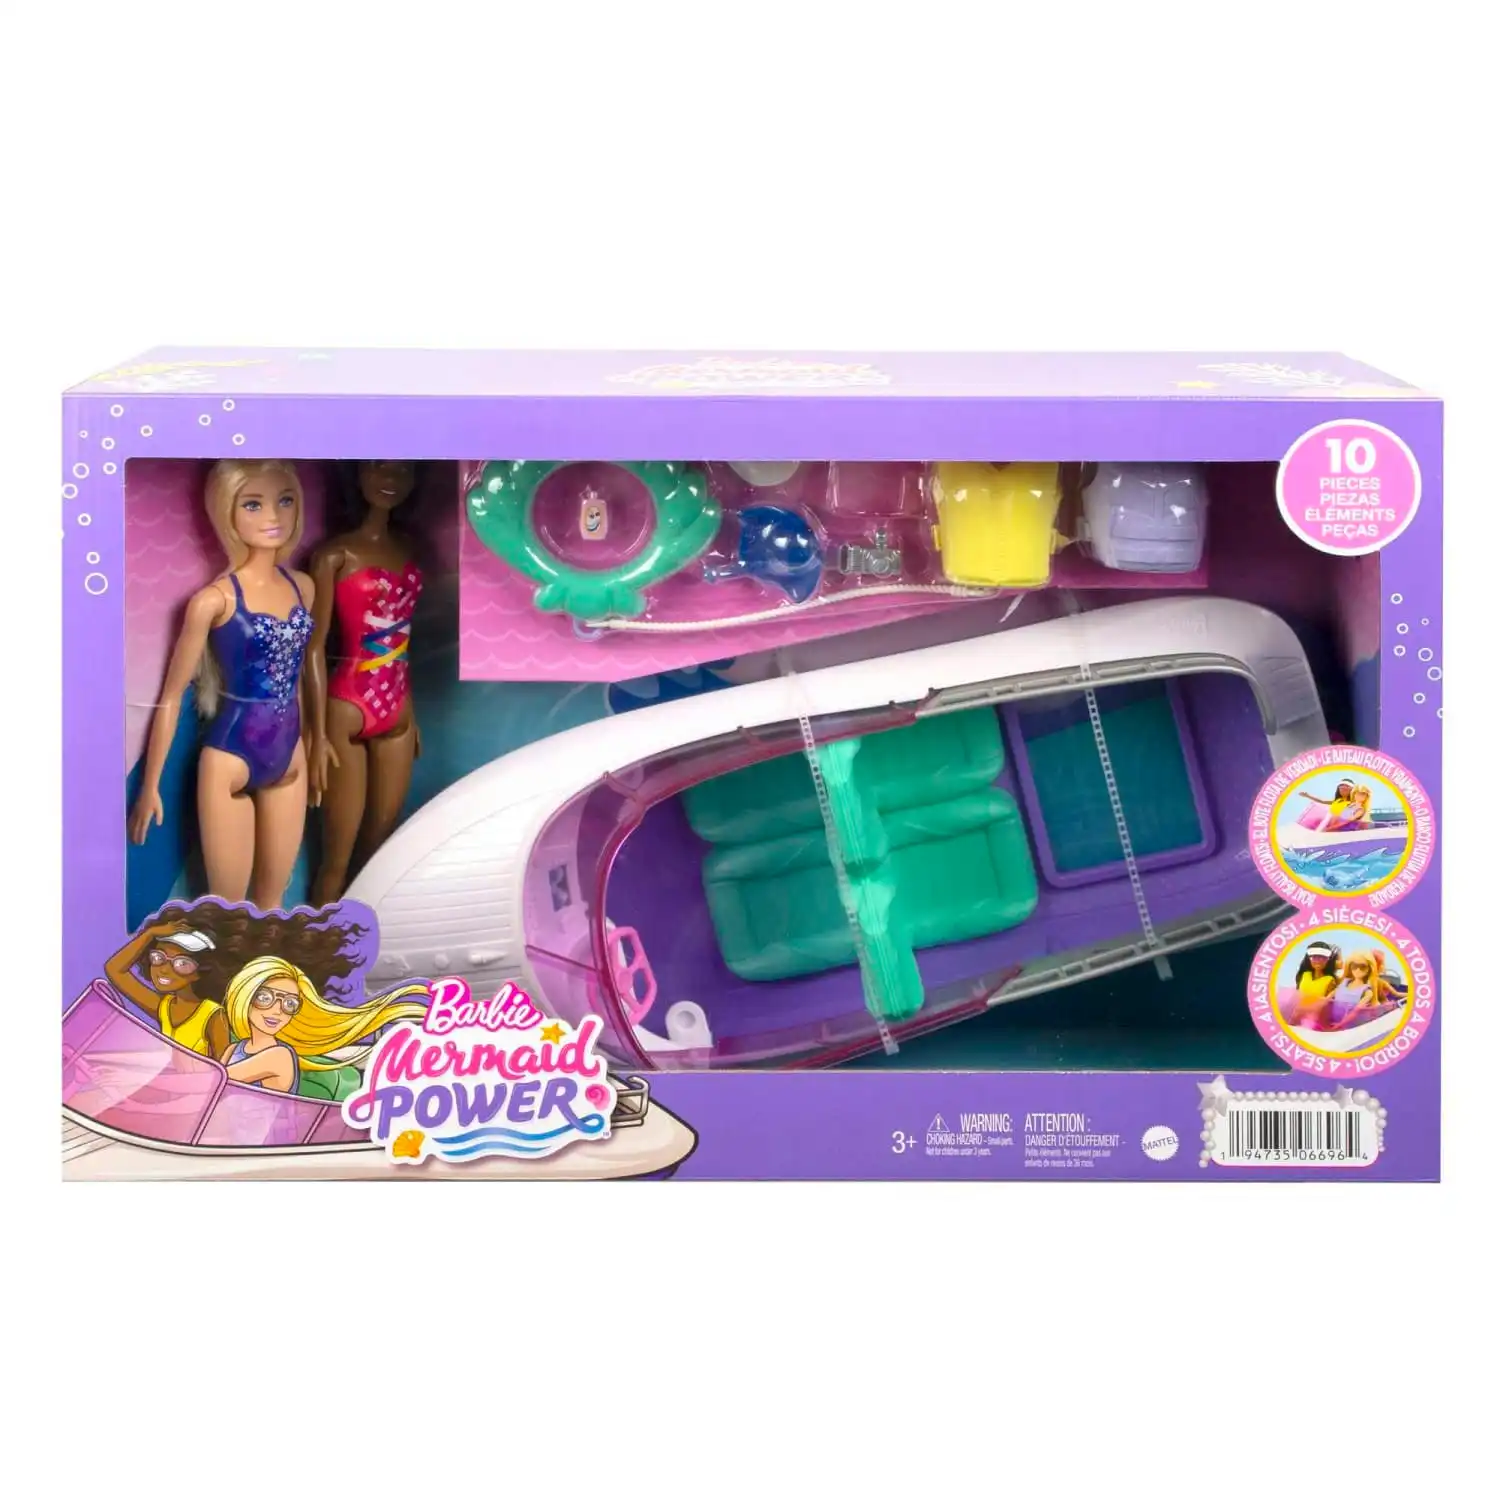 Barbie Mermaid Power Dolls & Boat Playset Toy For 3 Year Olds & Up